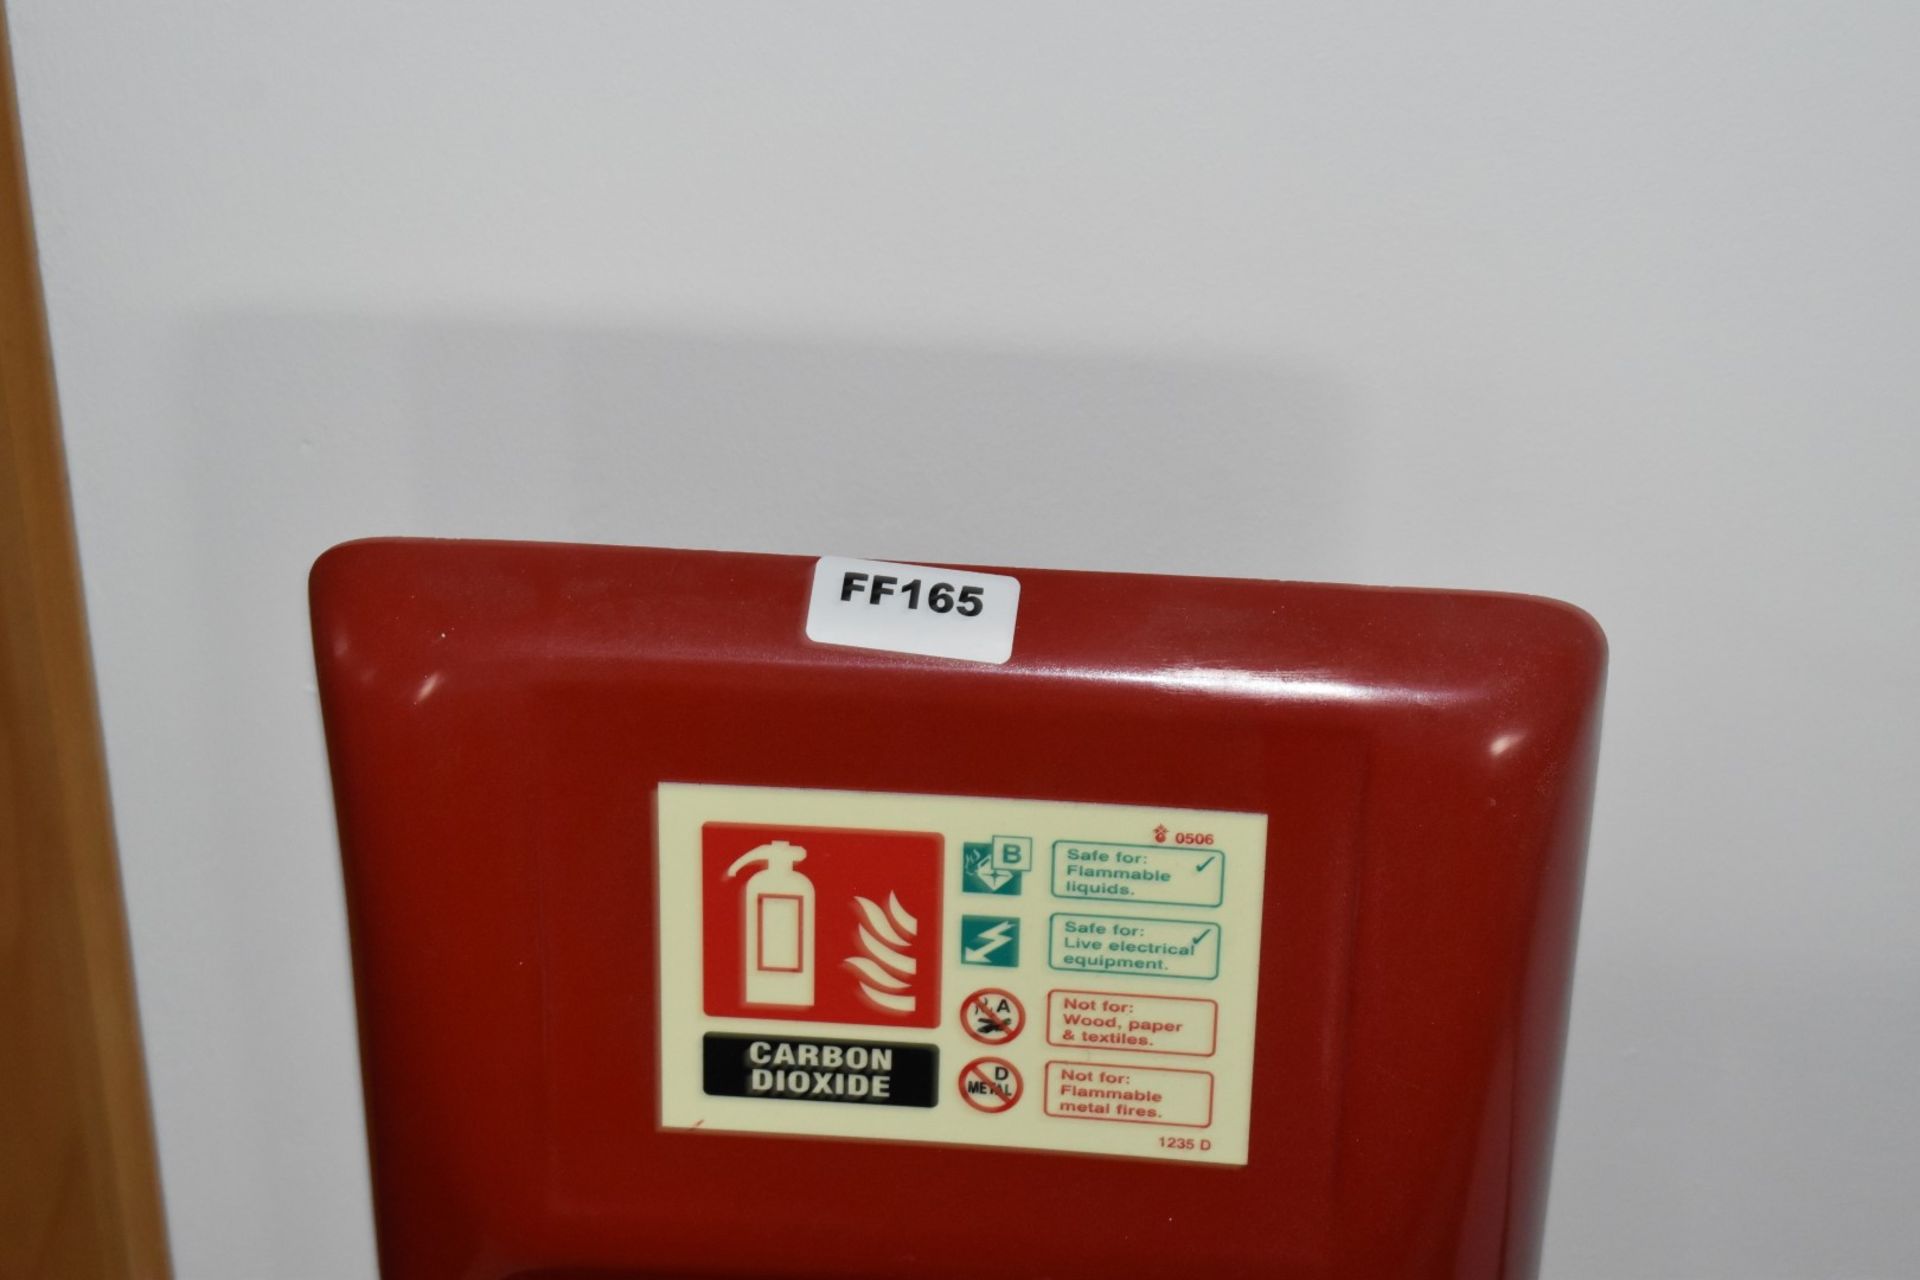 1 x 2kg Carbon Dioxide Fire Extinguisher With Stand - Ref: FF165 D - CL544 - Location: Leeds, LS14 - Image 2 of 3